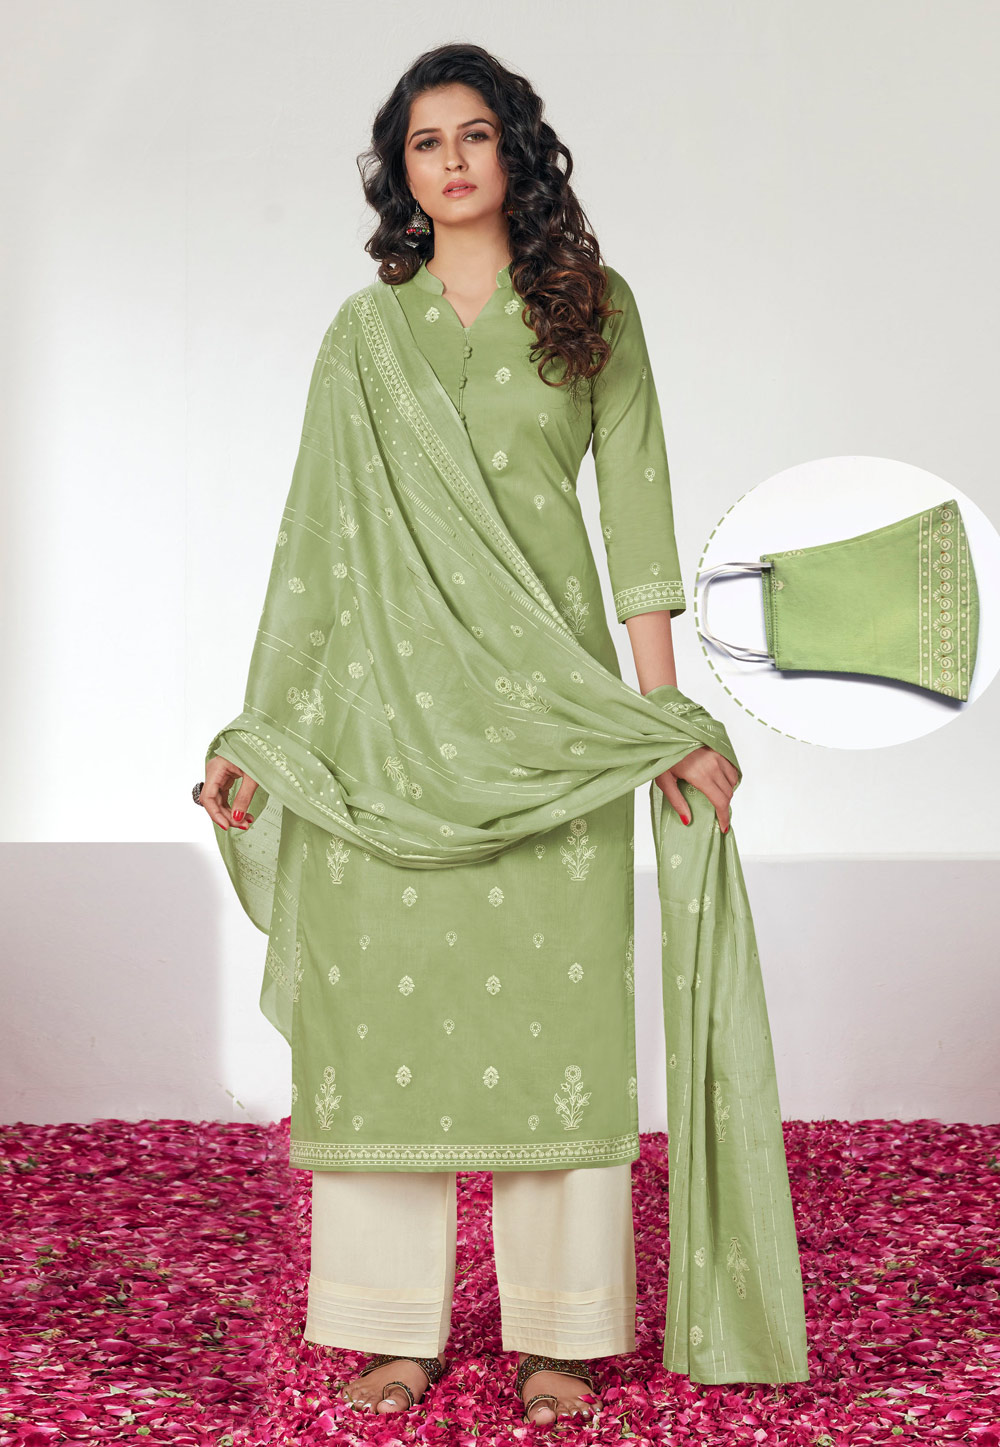 Light Green Cotton Straight Cut Suit With Face Mask 201880